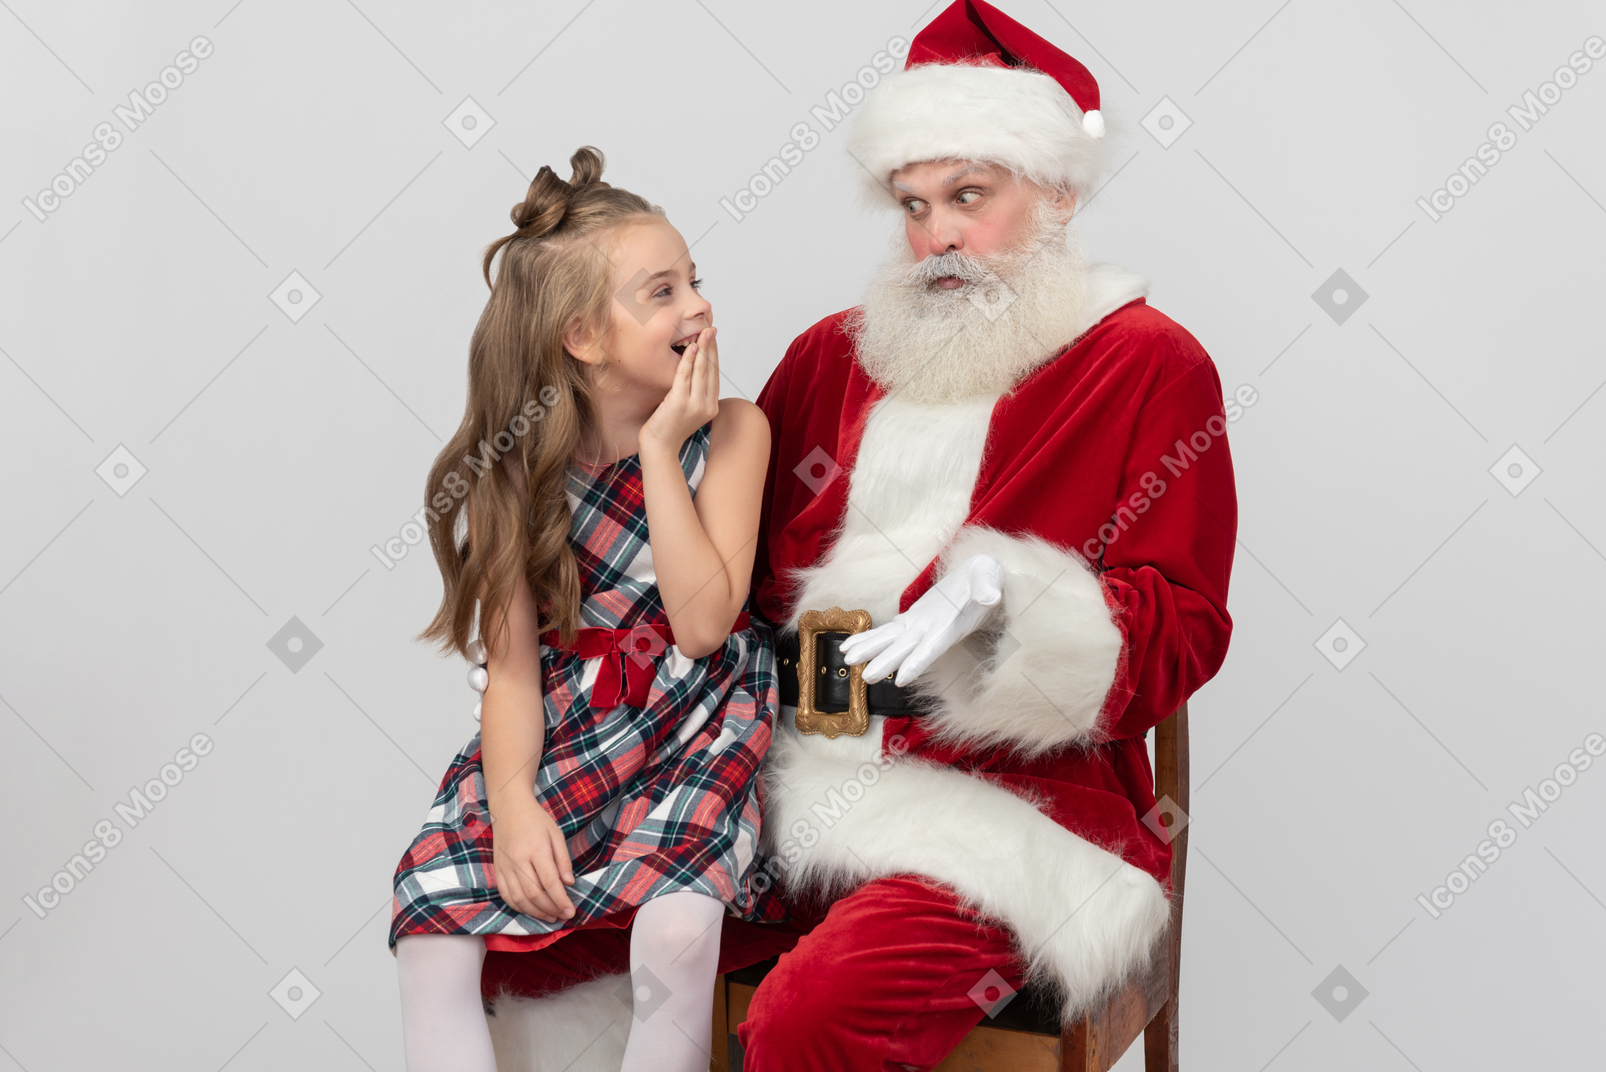 But kiddo, i don't have so many gifts